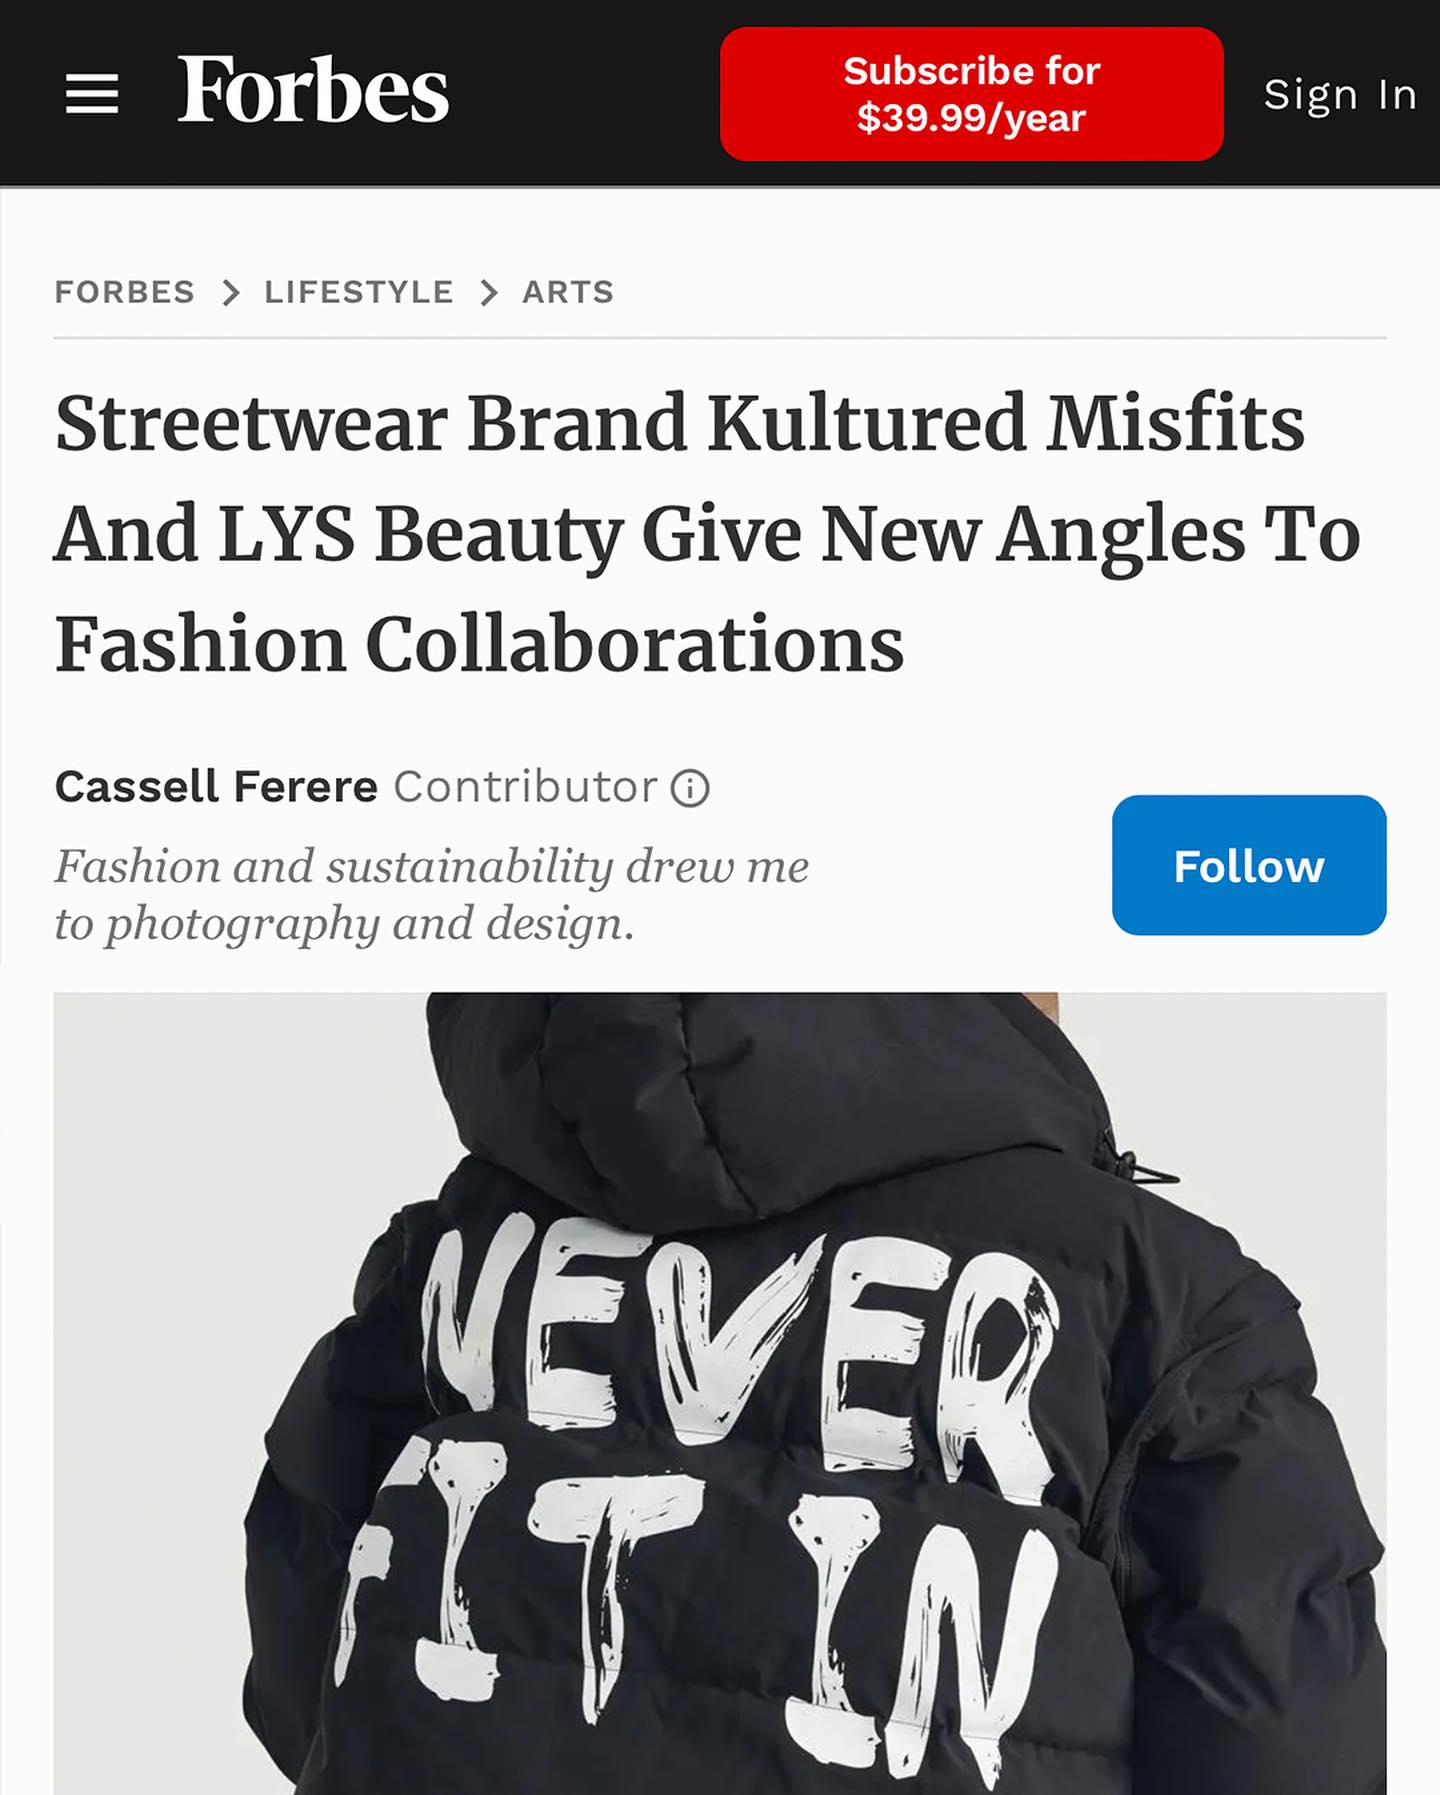 FORBES Feature : Streetwear Brand Kultured Misfits And LYS Beauty Give New Angles To Fashion Collaborations